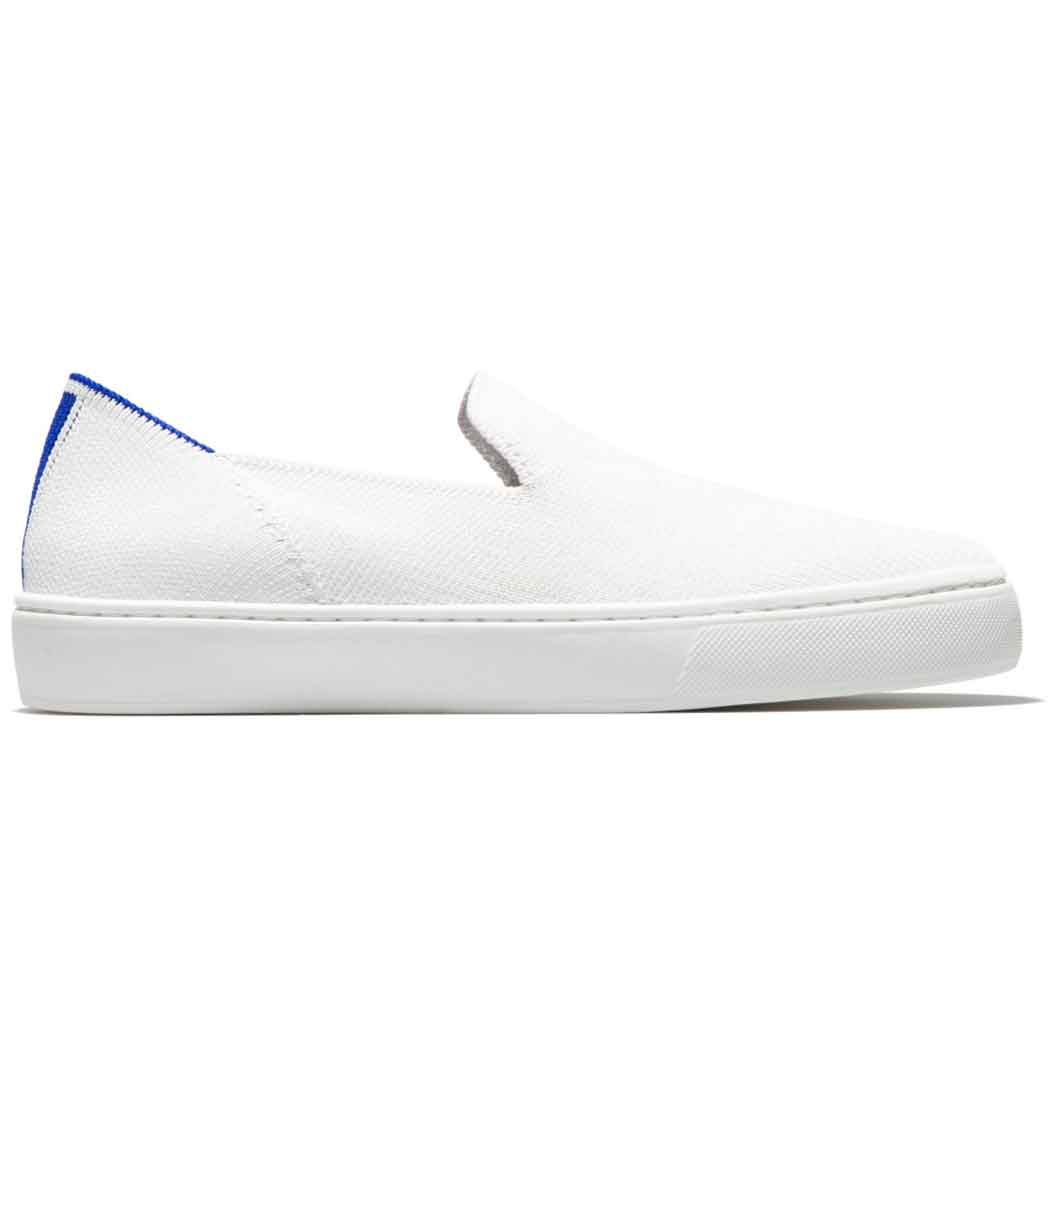 Rothy's Bright White Sneaker | Sustainable White Sneakers Brands You Should Know